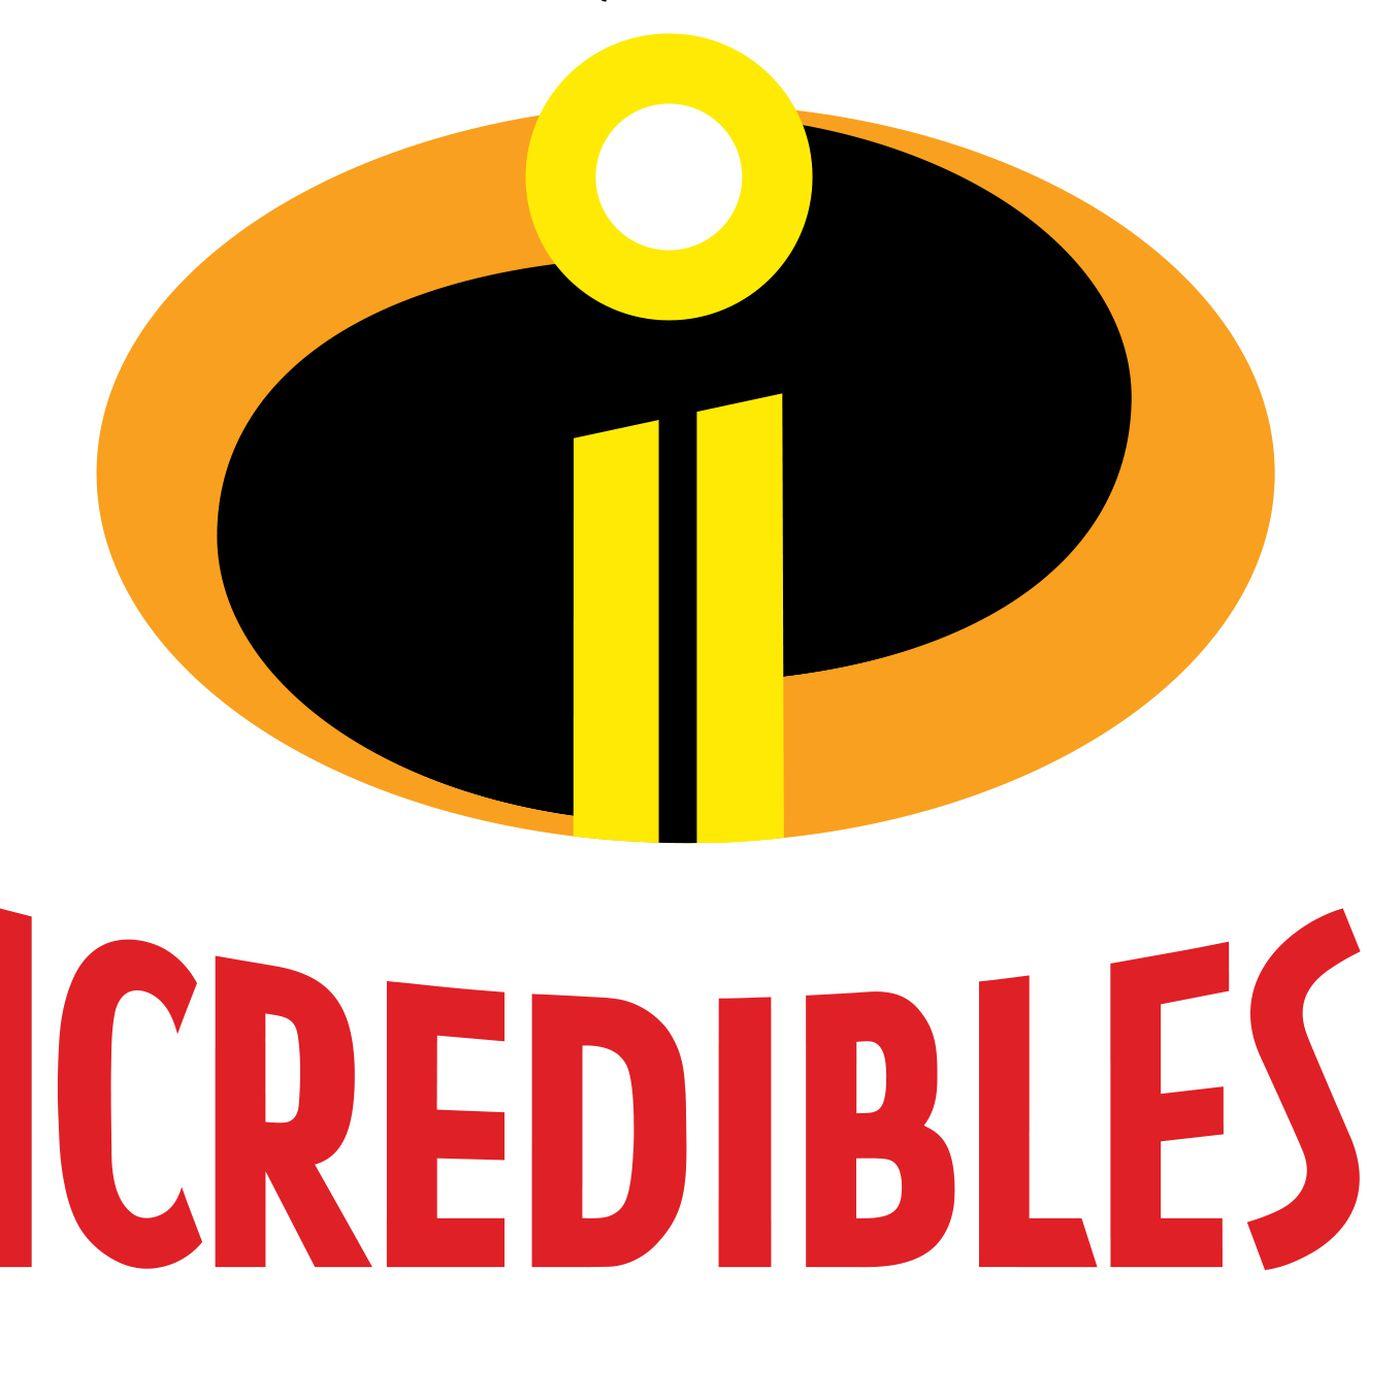 2 Disney Pixar Incredibles Logo - The Incredibles 2, Toy Story 4 and ... Planes? What we learned from ...